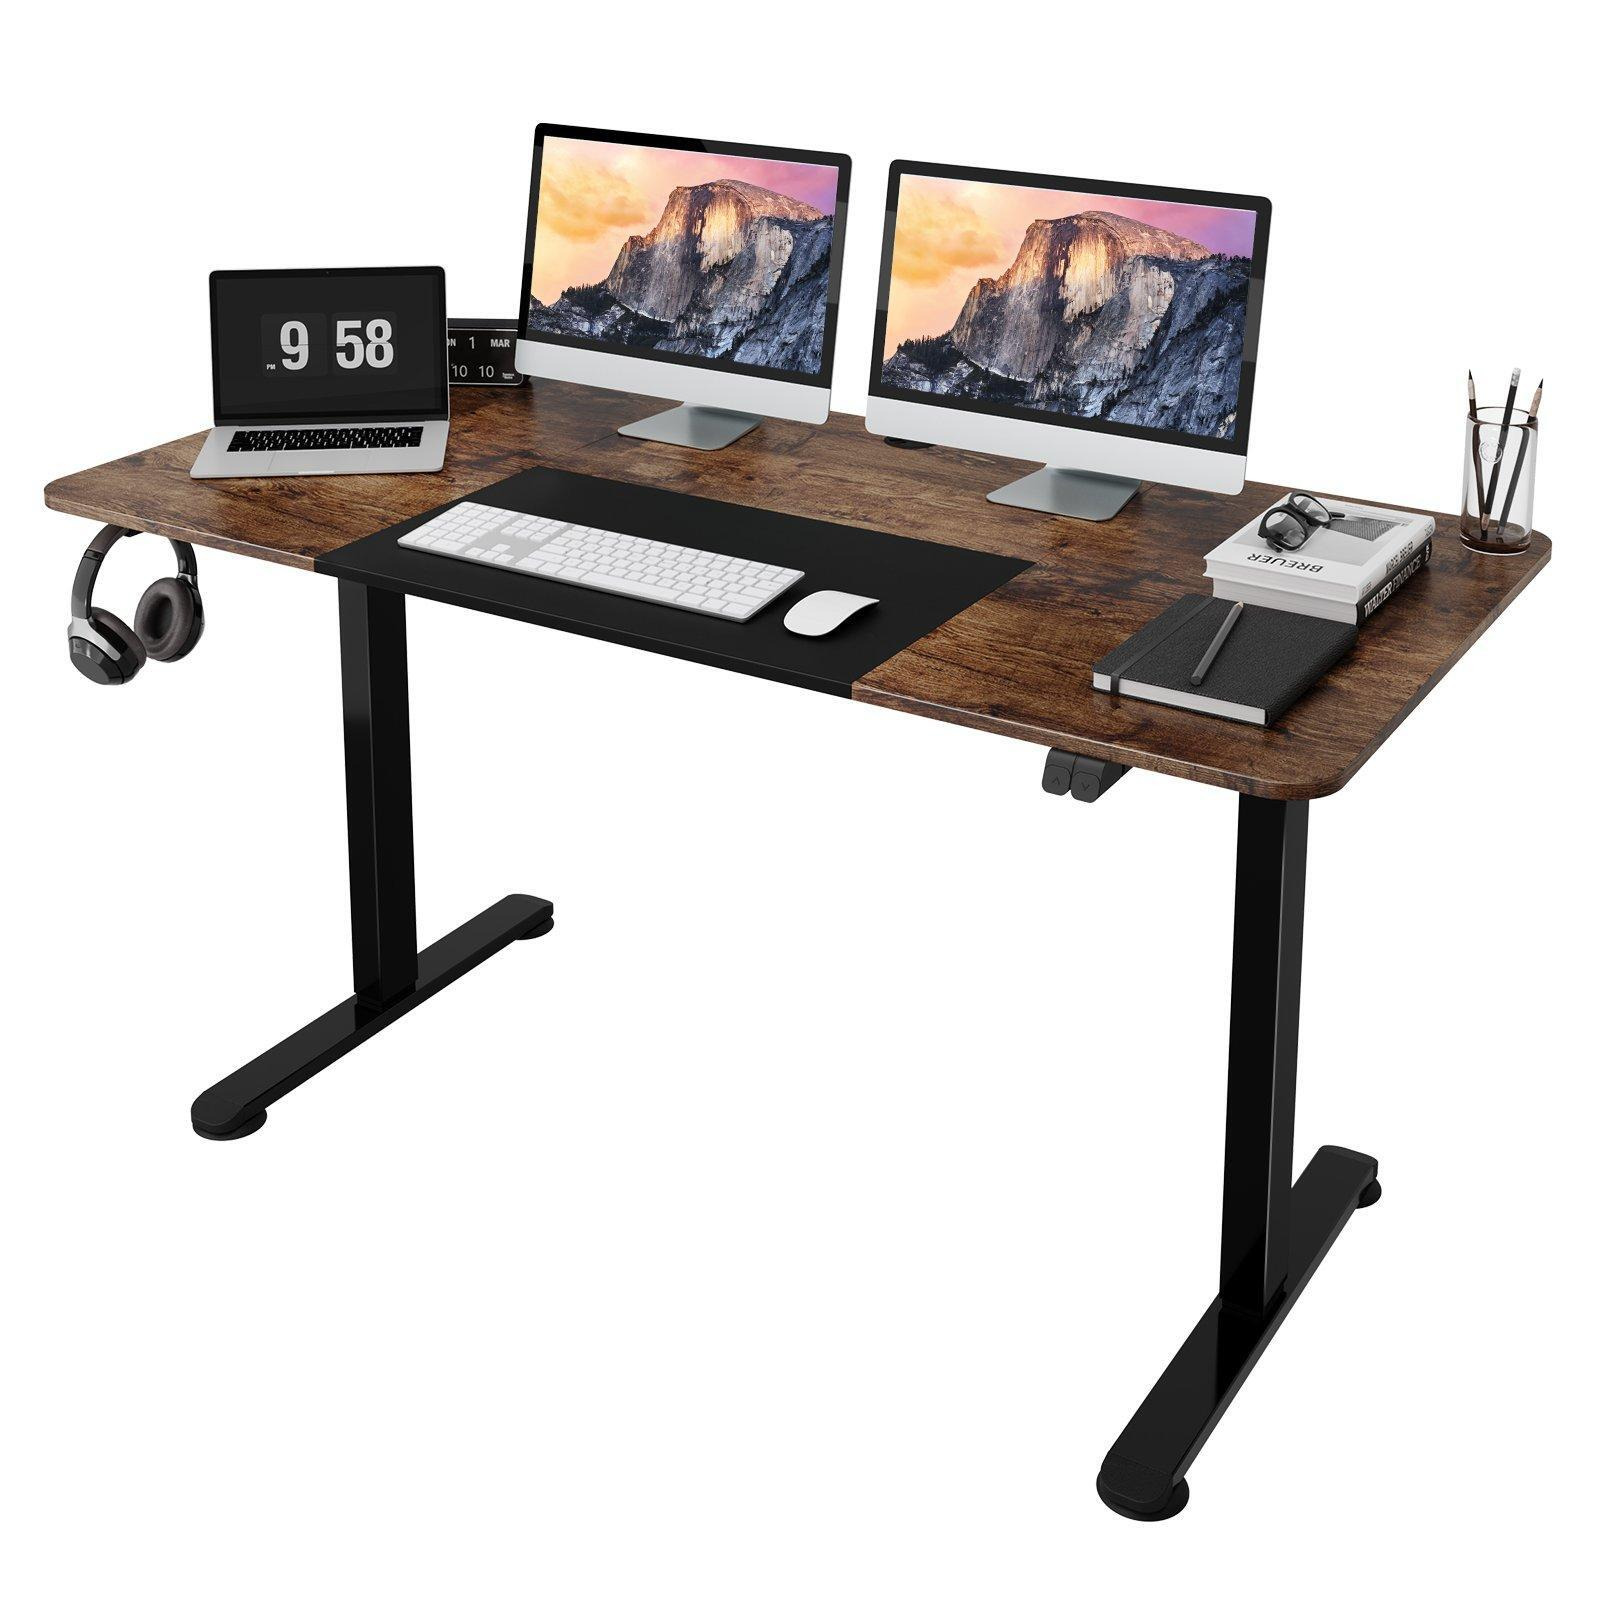 140 x 70cm Electric Standing Desk Height Adjustable Sit to Stand Table Computer - image 1